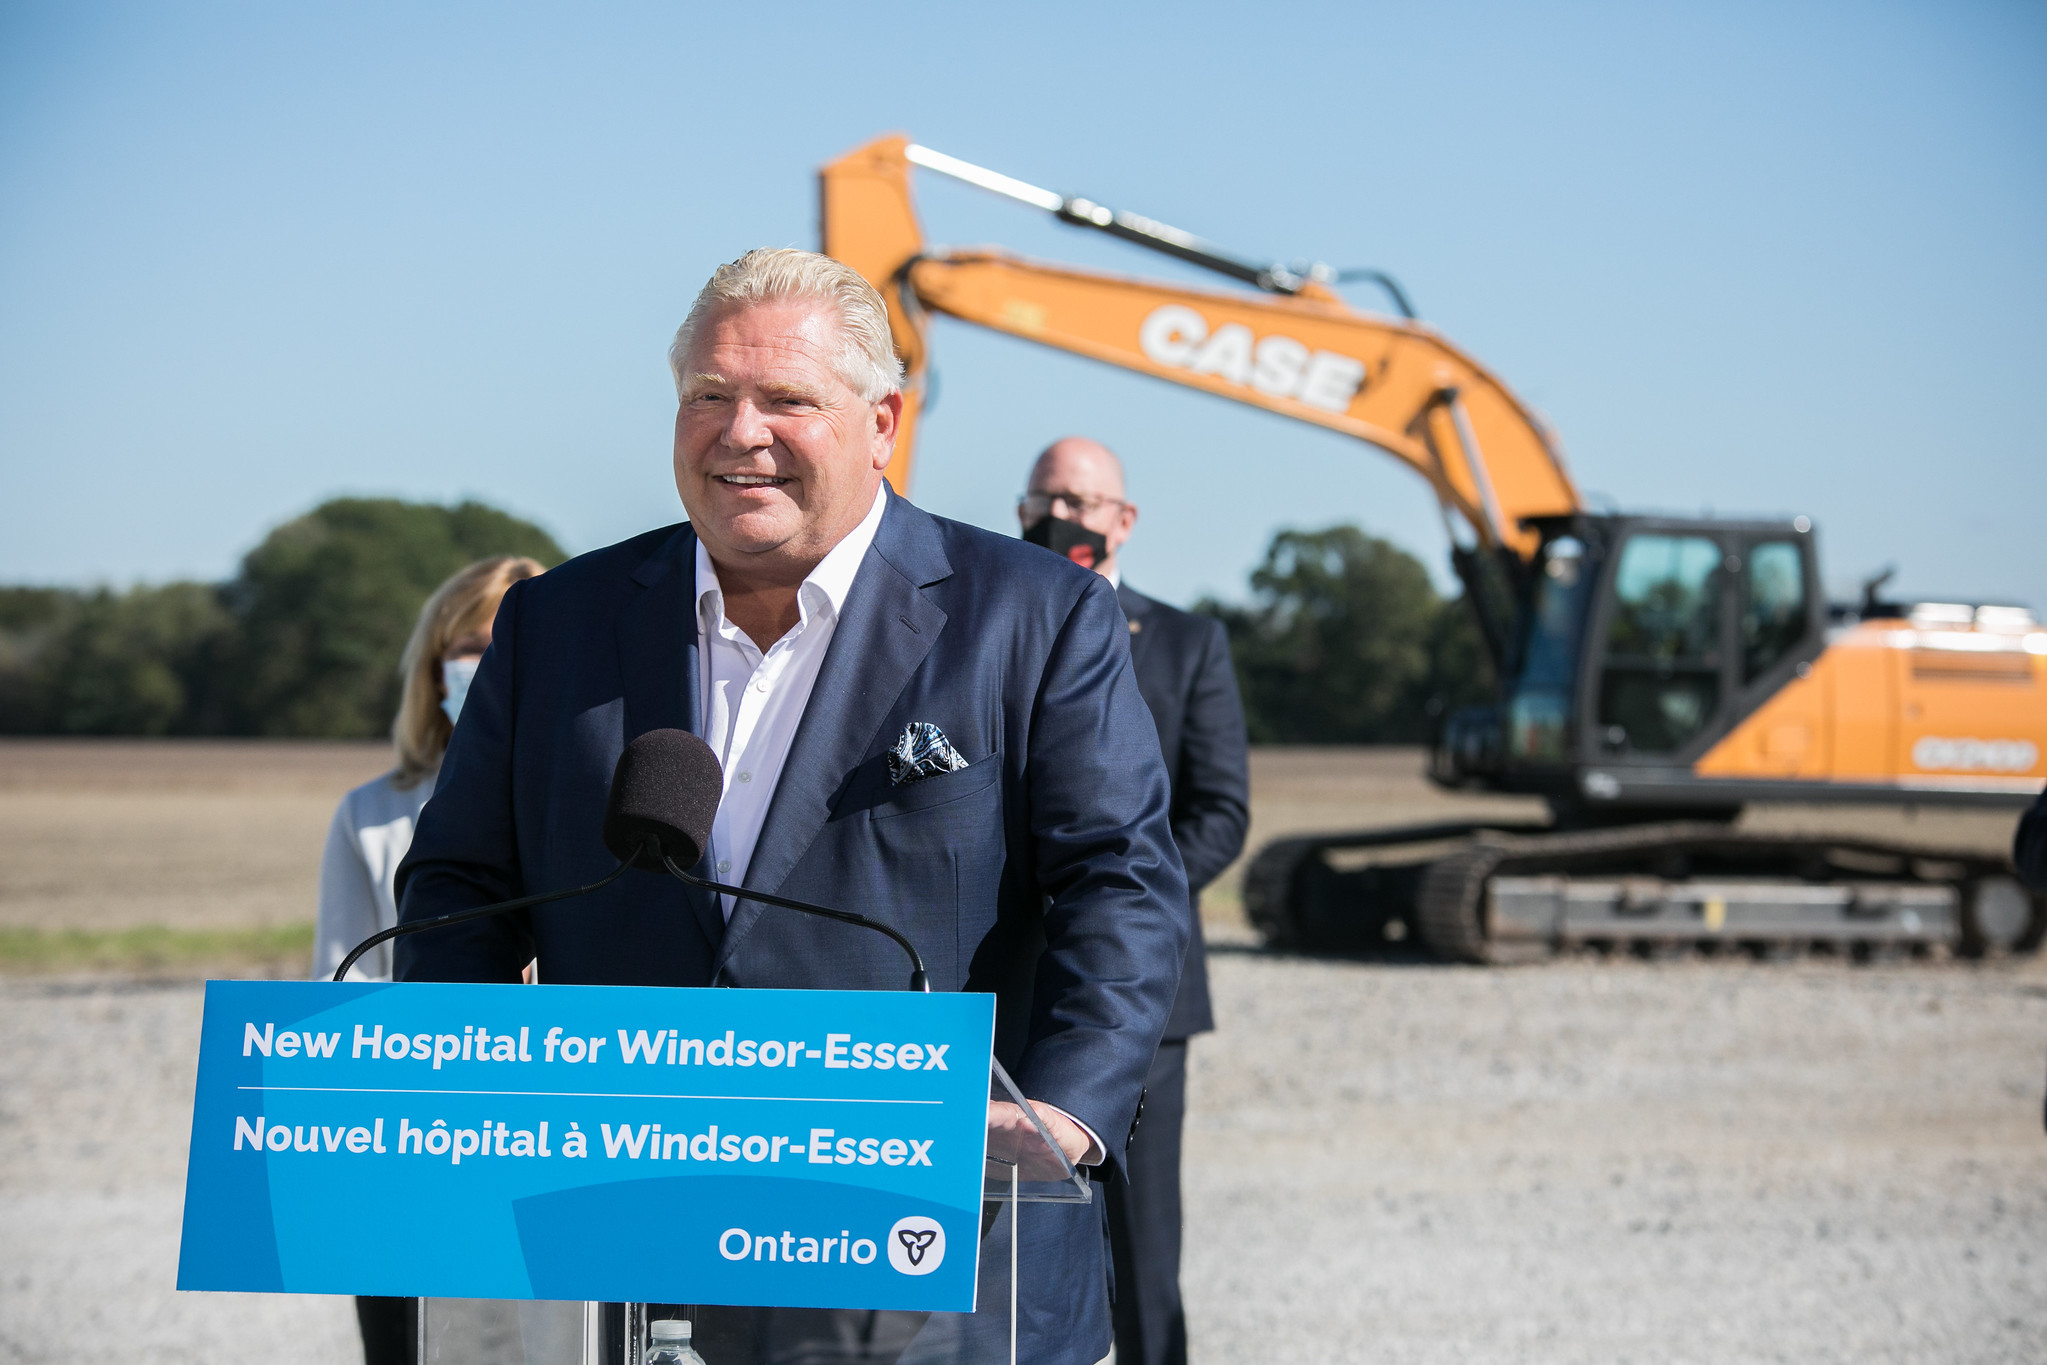 Premier giving remarks at the site of future hospital in Windsor Essex.